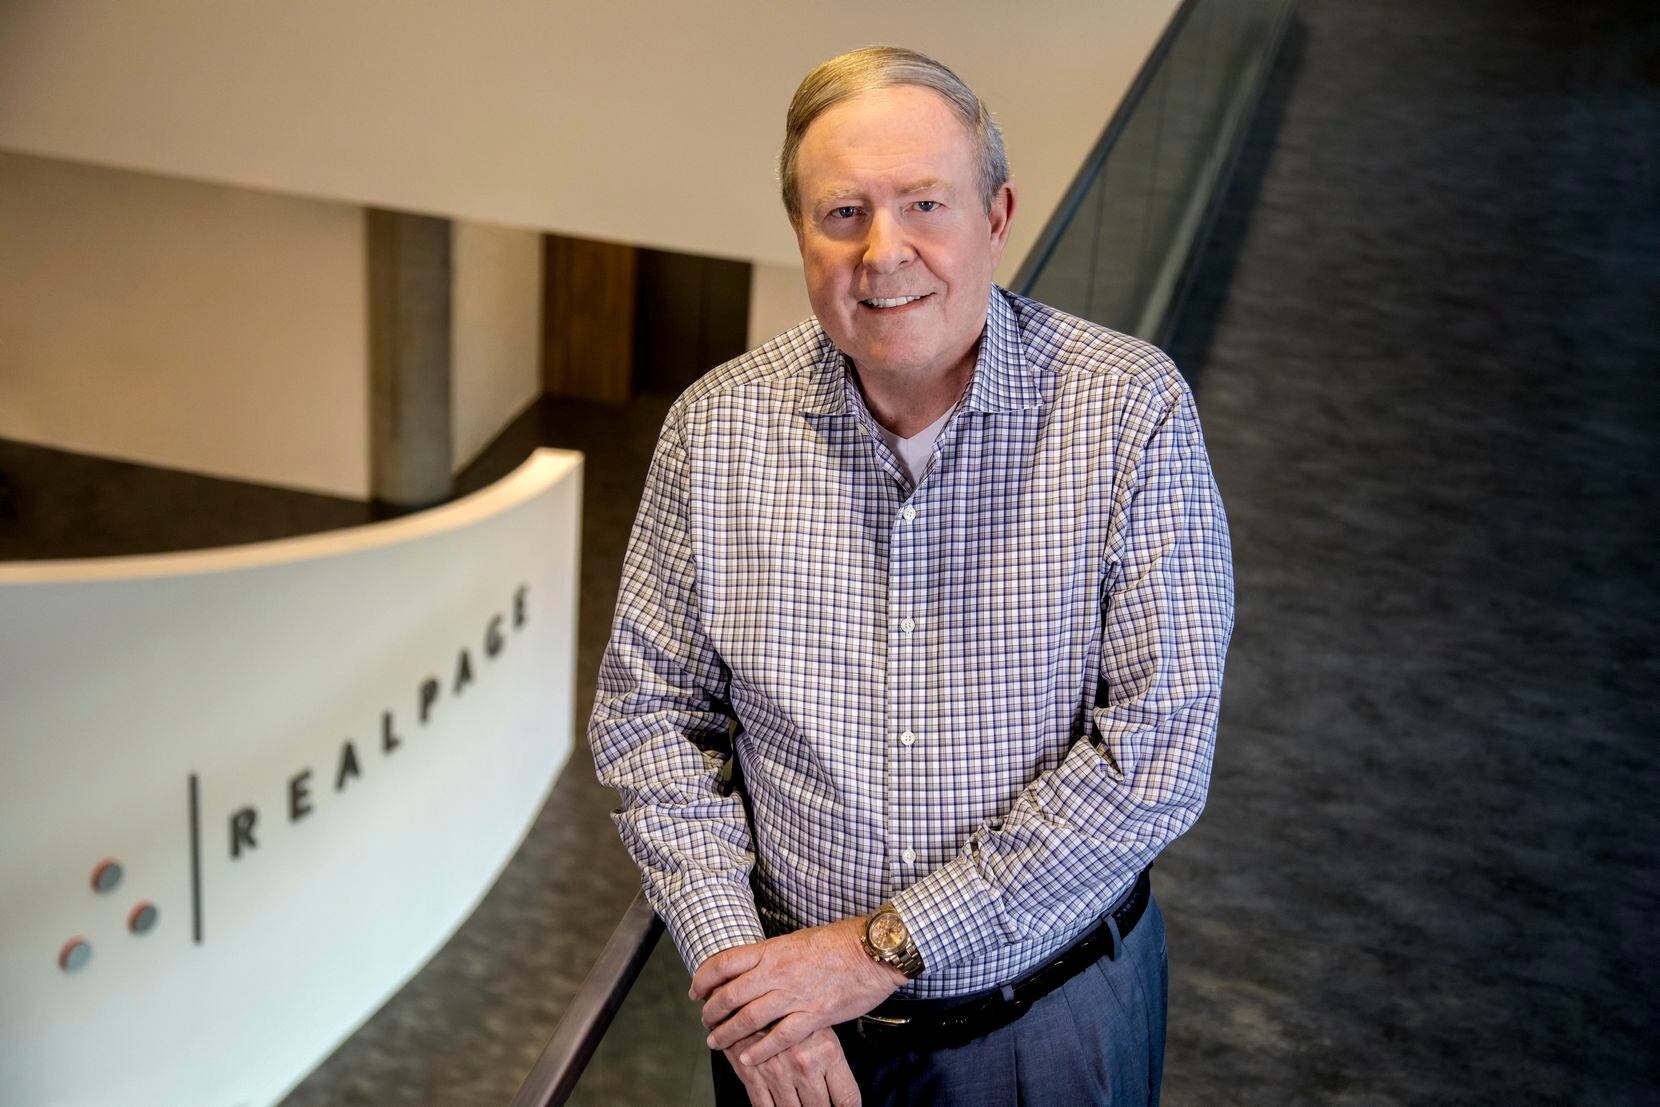 Steve Winn was the founder and longtime CEO of RealPage Inc., which makes software for...